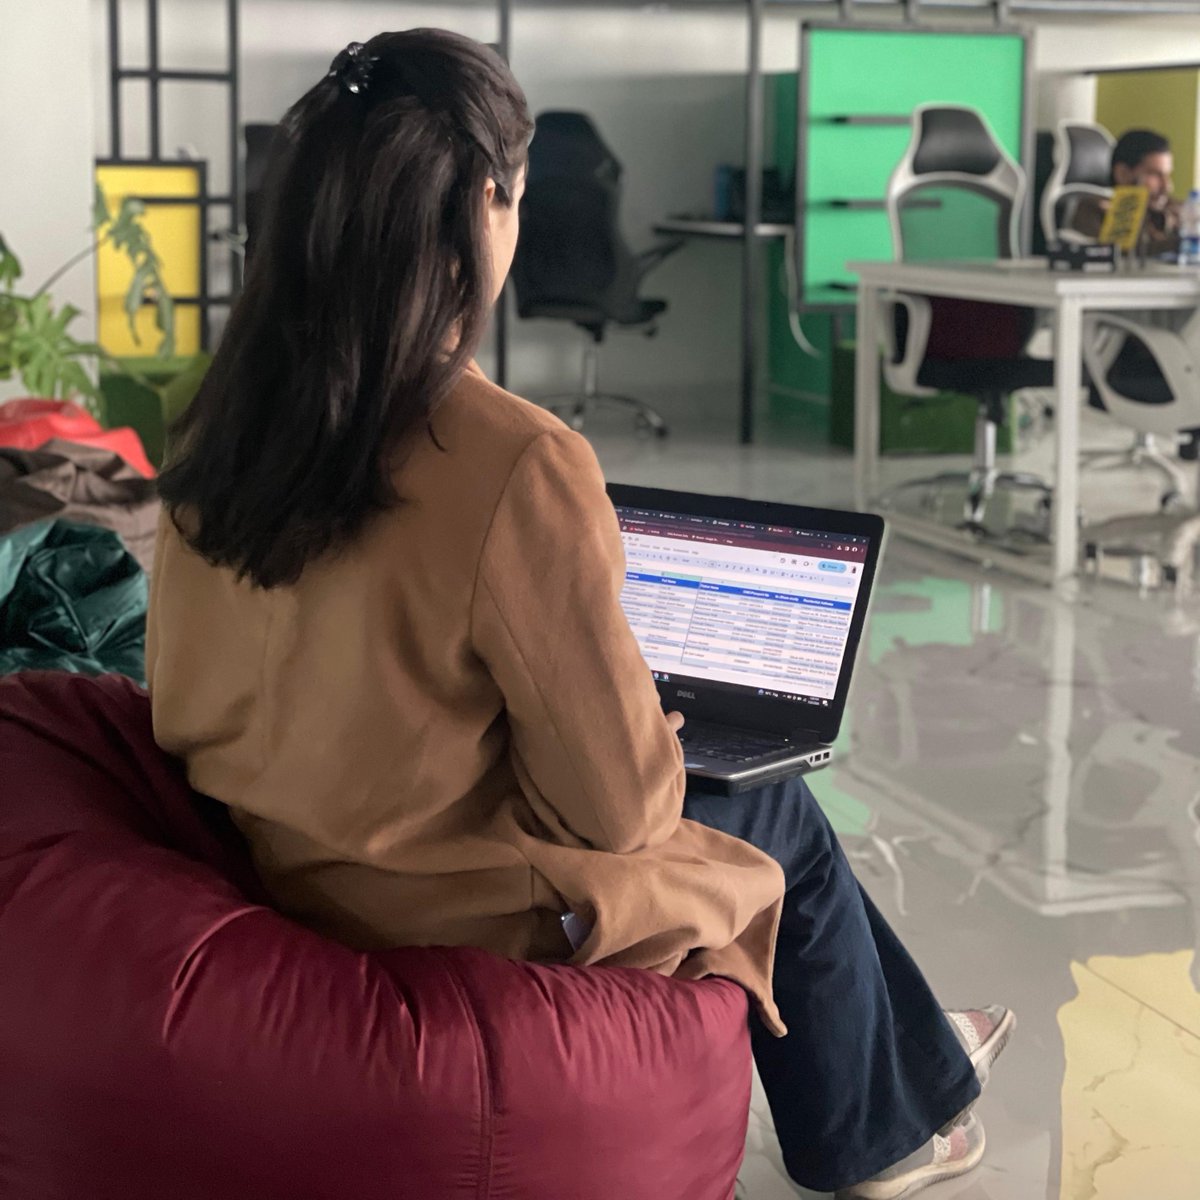 Working in comfort! 💼

Our shared workspace is all about cozy vibes and productive.

#WorkSmart #CozyWorkspace #twinhub #coworkingcommunity #coworkingoffice #corporatelife #coworkers #WorkVibe #Twinhub #islamabadcoworkspace #coworking #sharedspace #privateoffice #islamabad